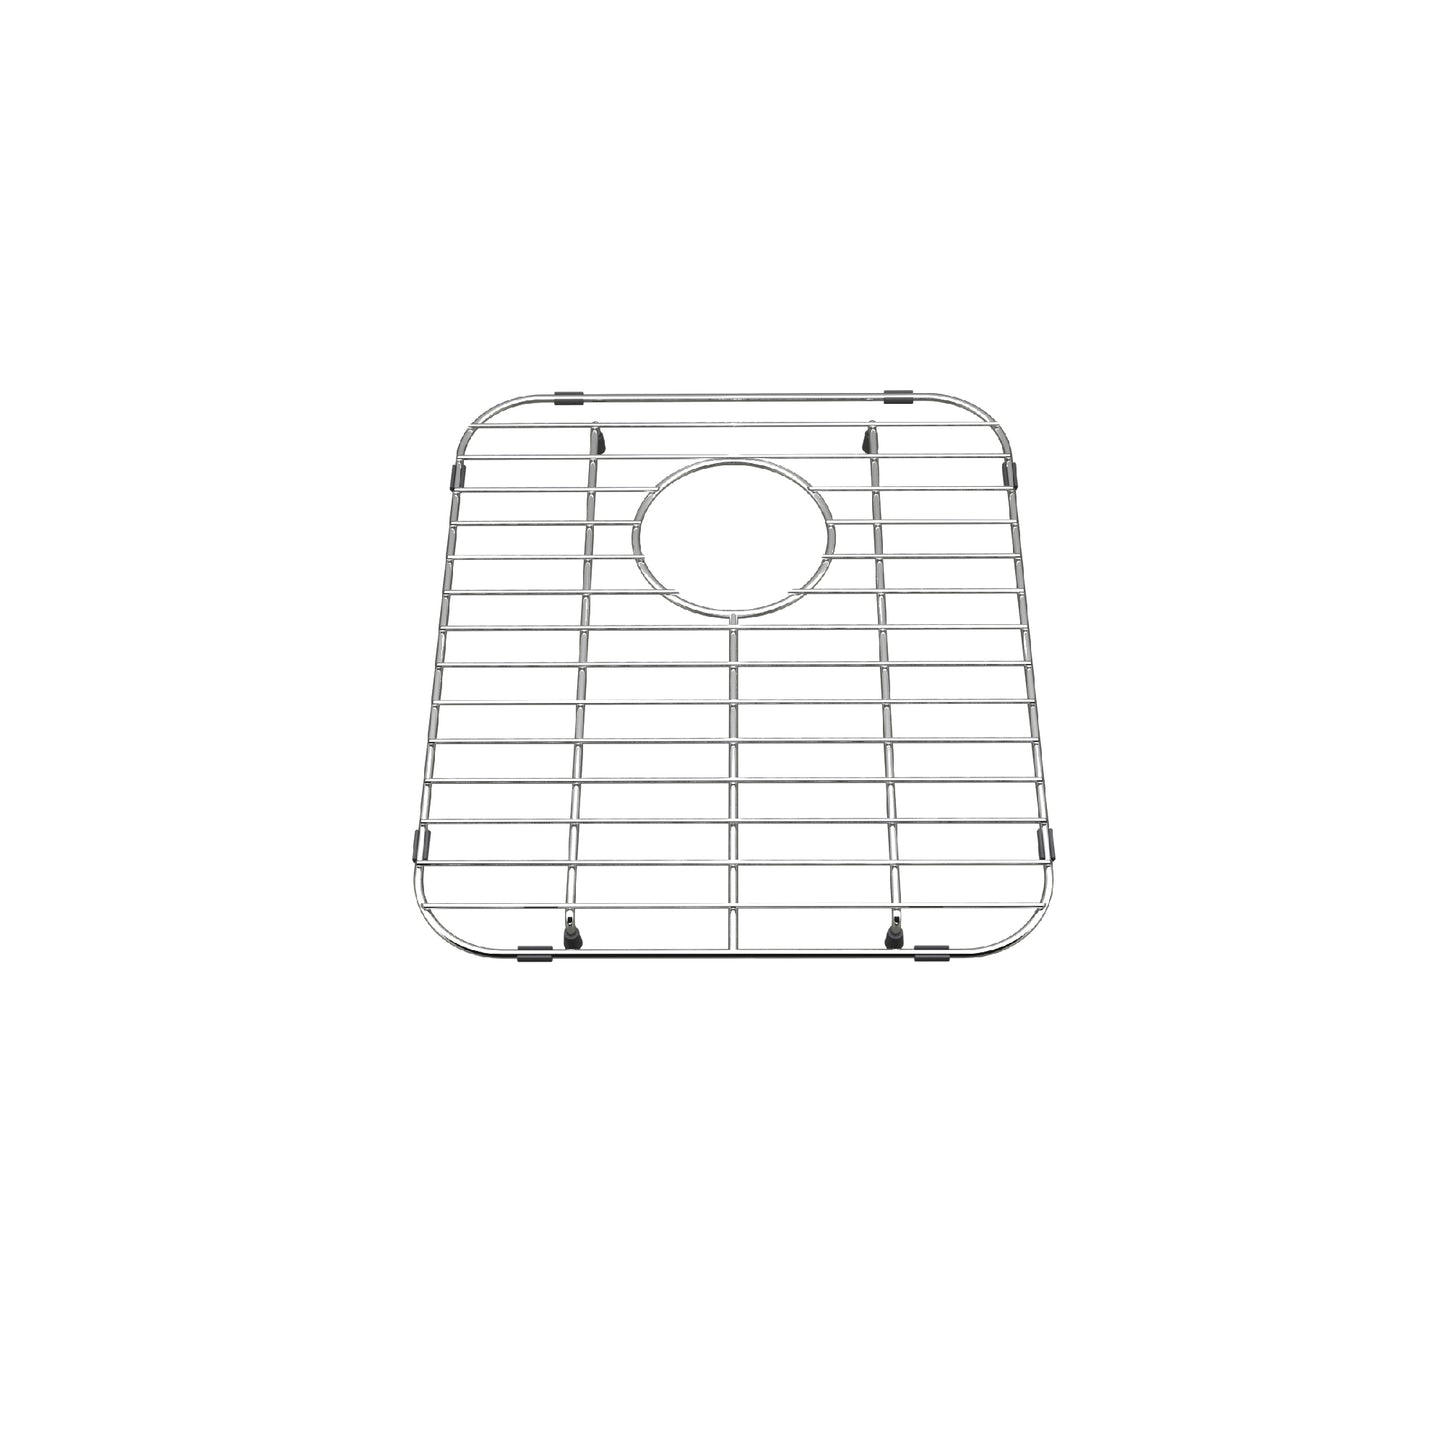 KINDRED BG1715R Stainless Steel Bottom Grid for Sink 15.5-in x 13.5-in In Stainless Steel